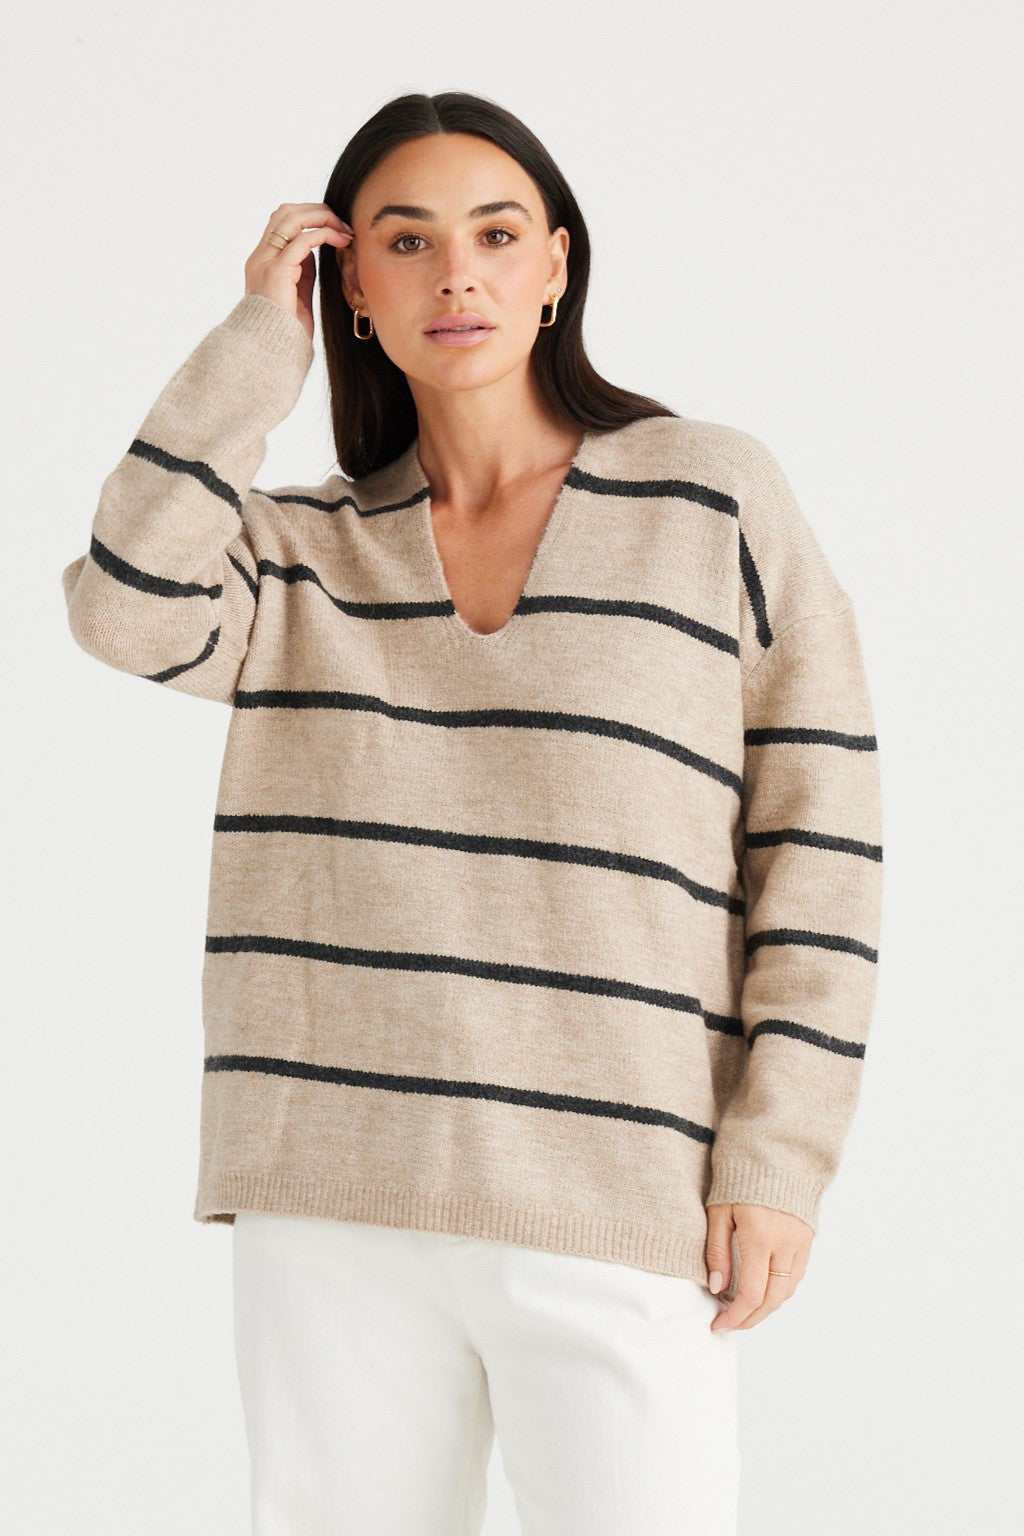 Hallie Knit - Taupe / Charcoal Stripe